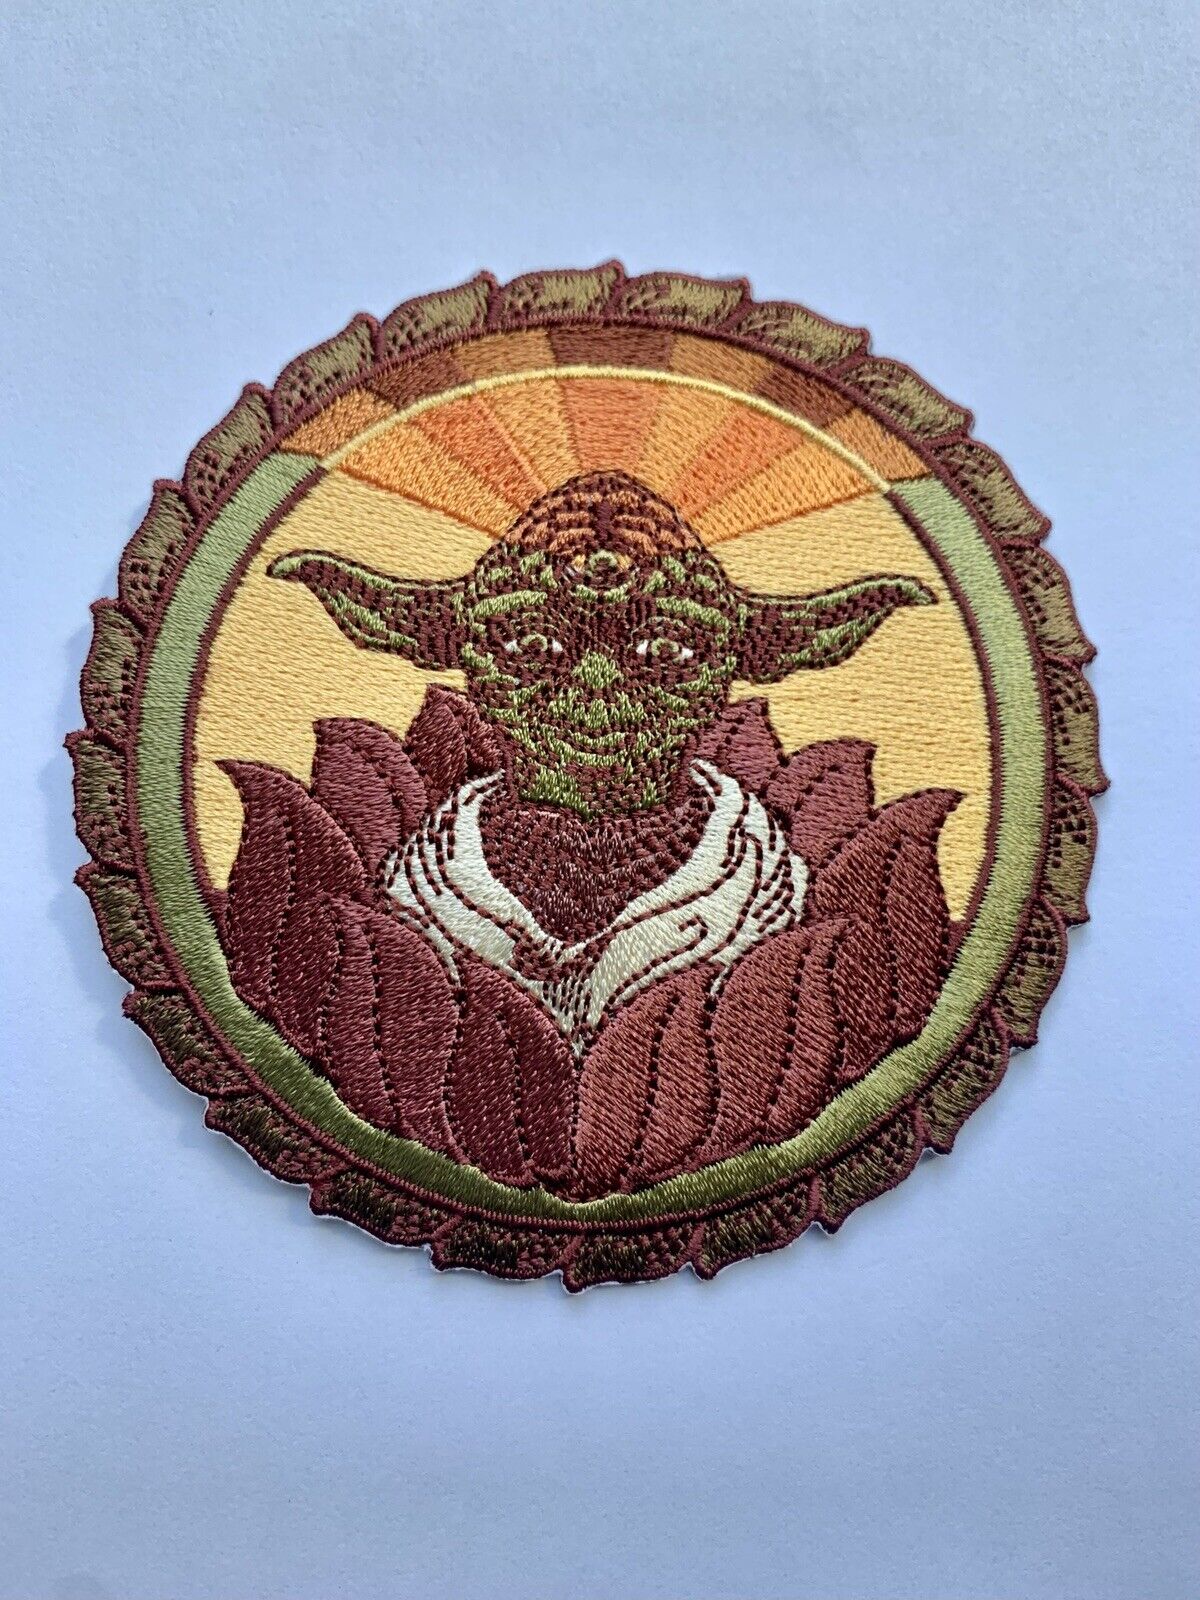 Yoda The Wise Iron On Star Wars patch 3.5”